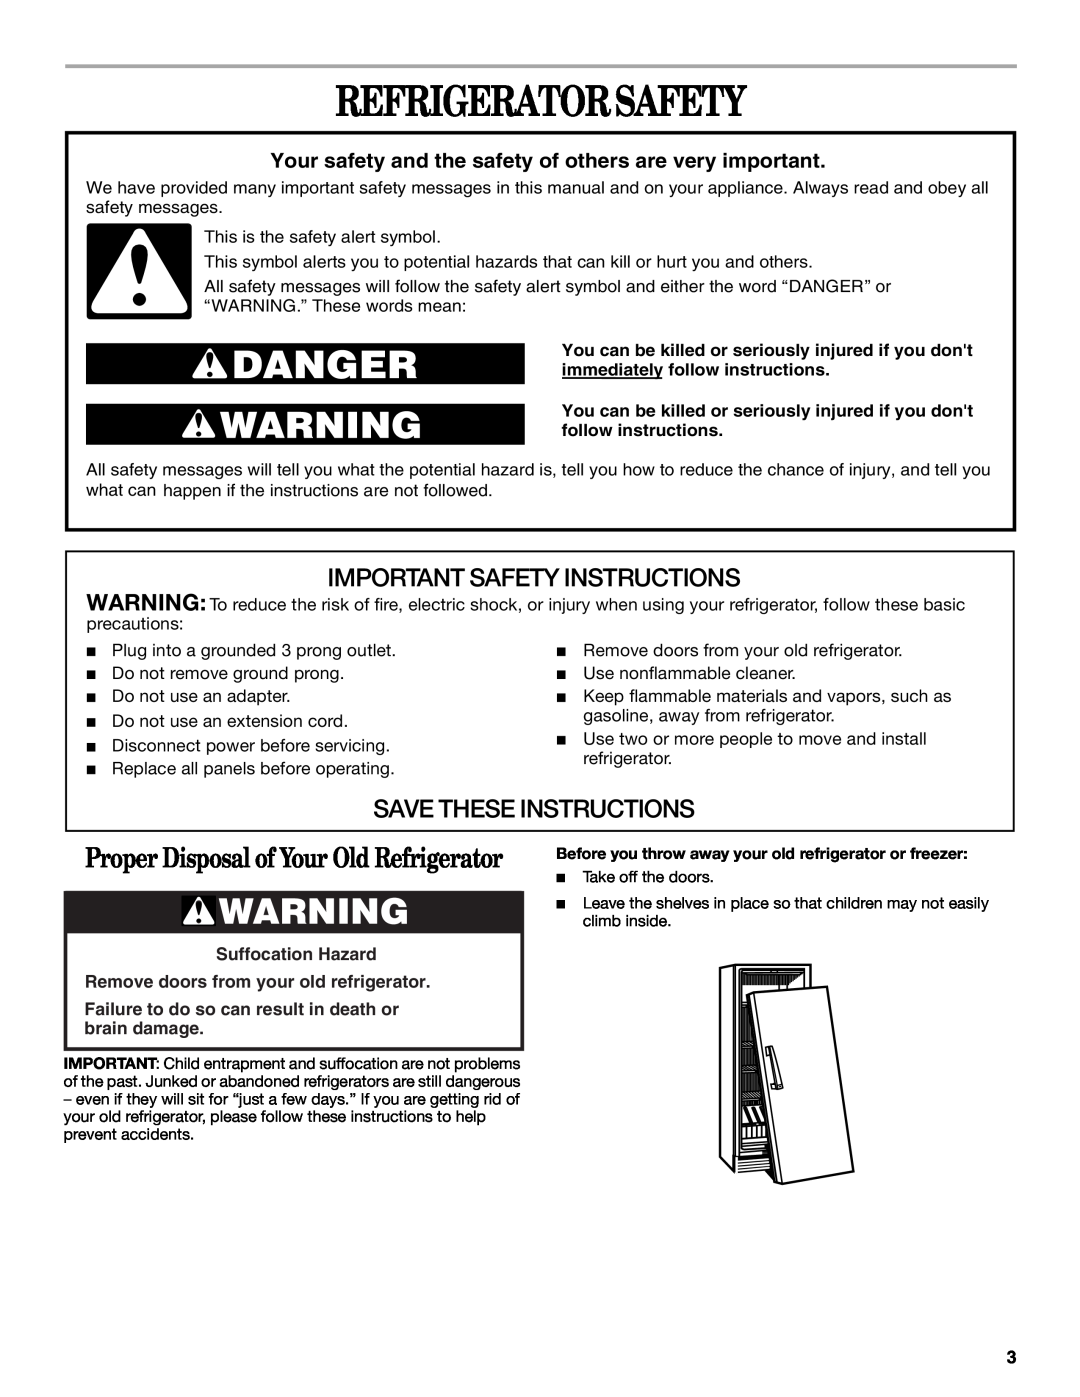 Whirlpool EL7ATRRMQ00 manual Refrigeratorsafety, Proper Disposal of Your Old Refrigerator, Important Safety Instructions 